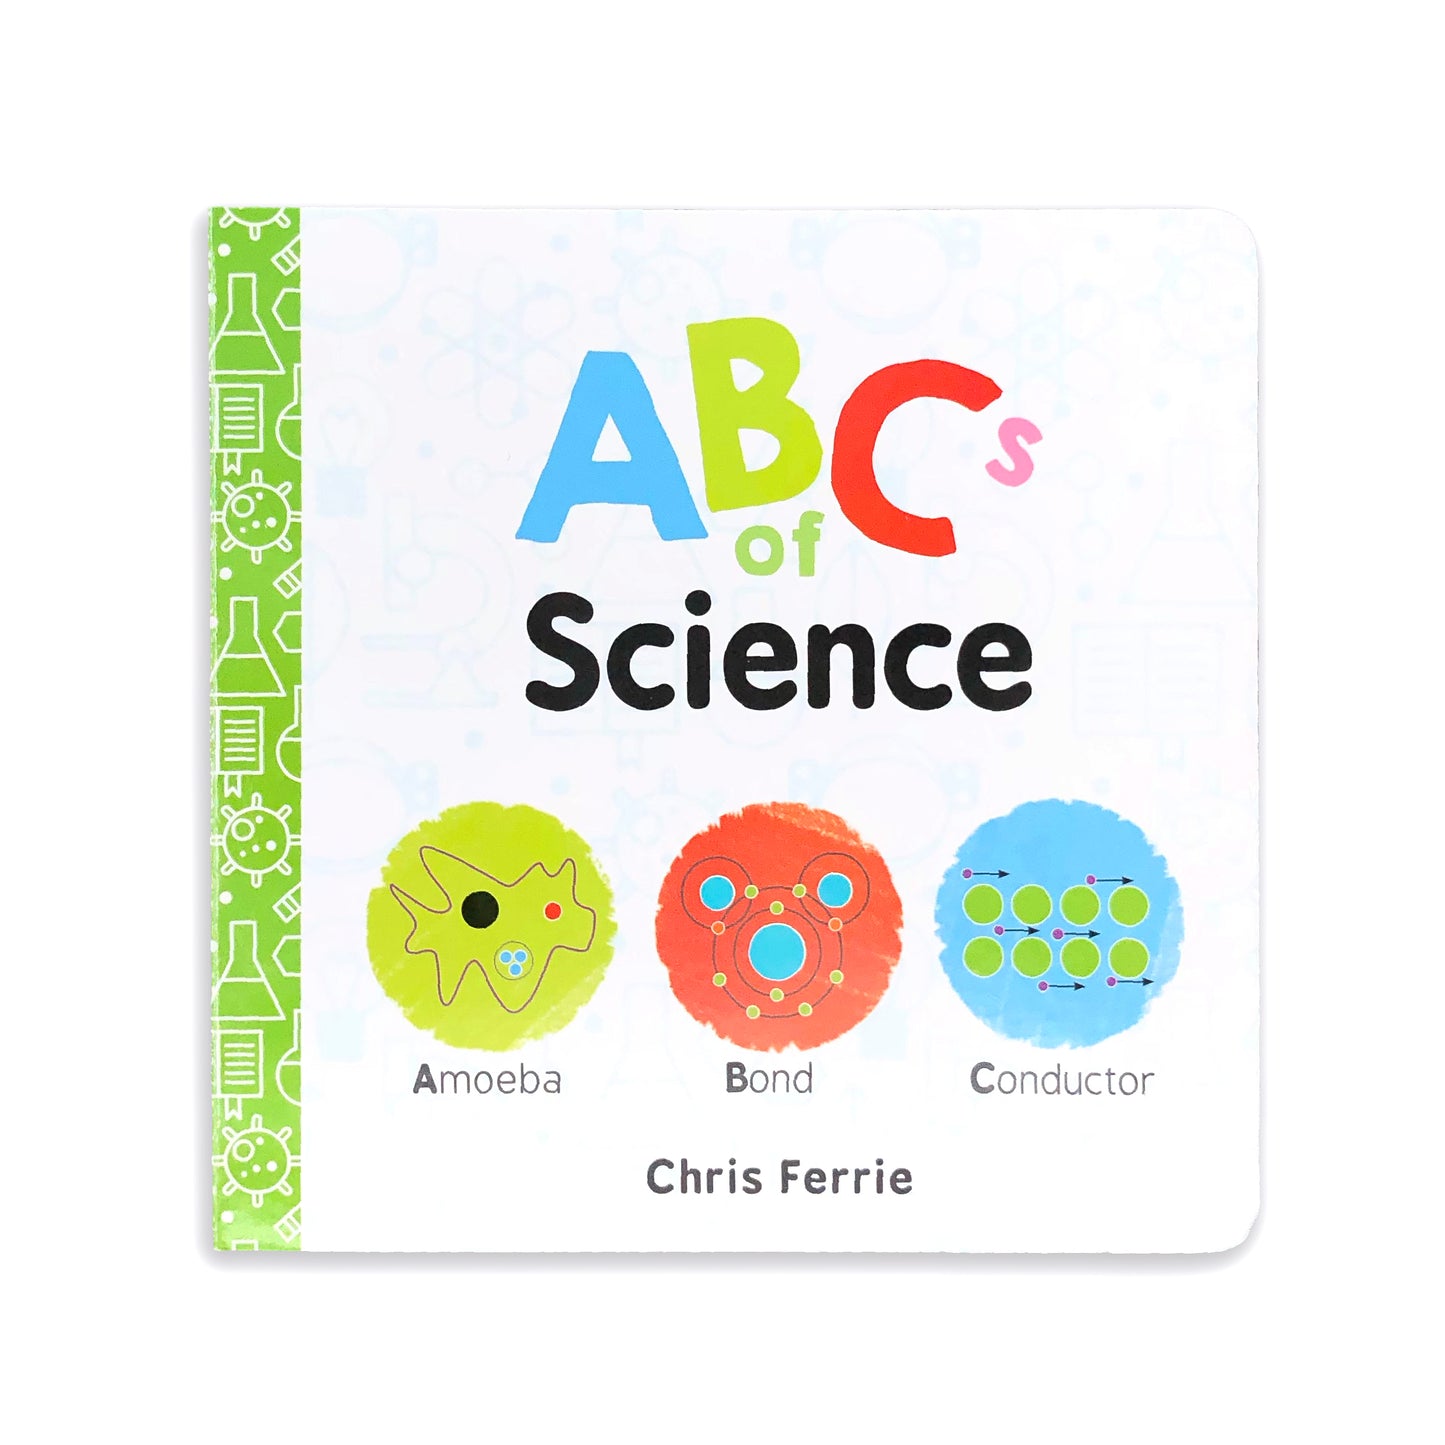 ABCs of Science - Chris Ferrie